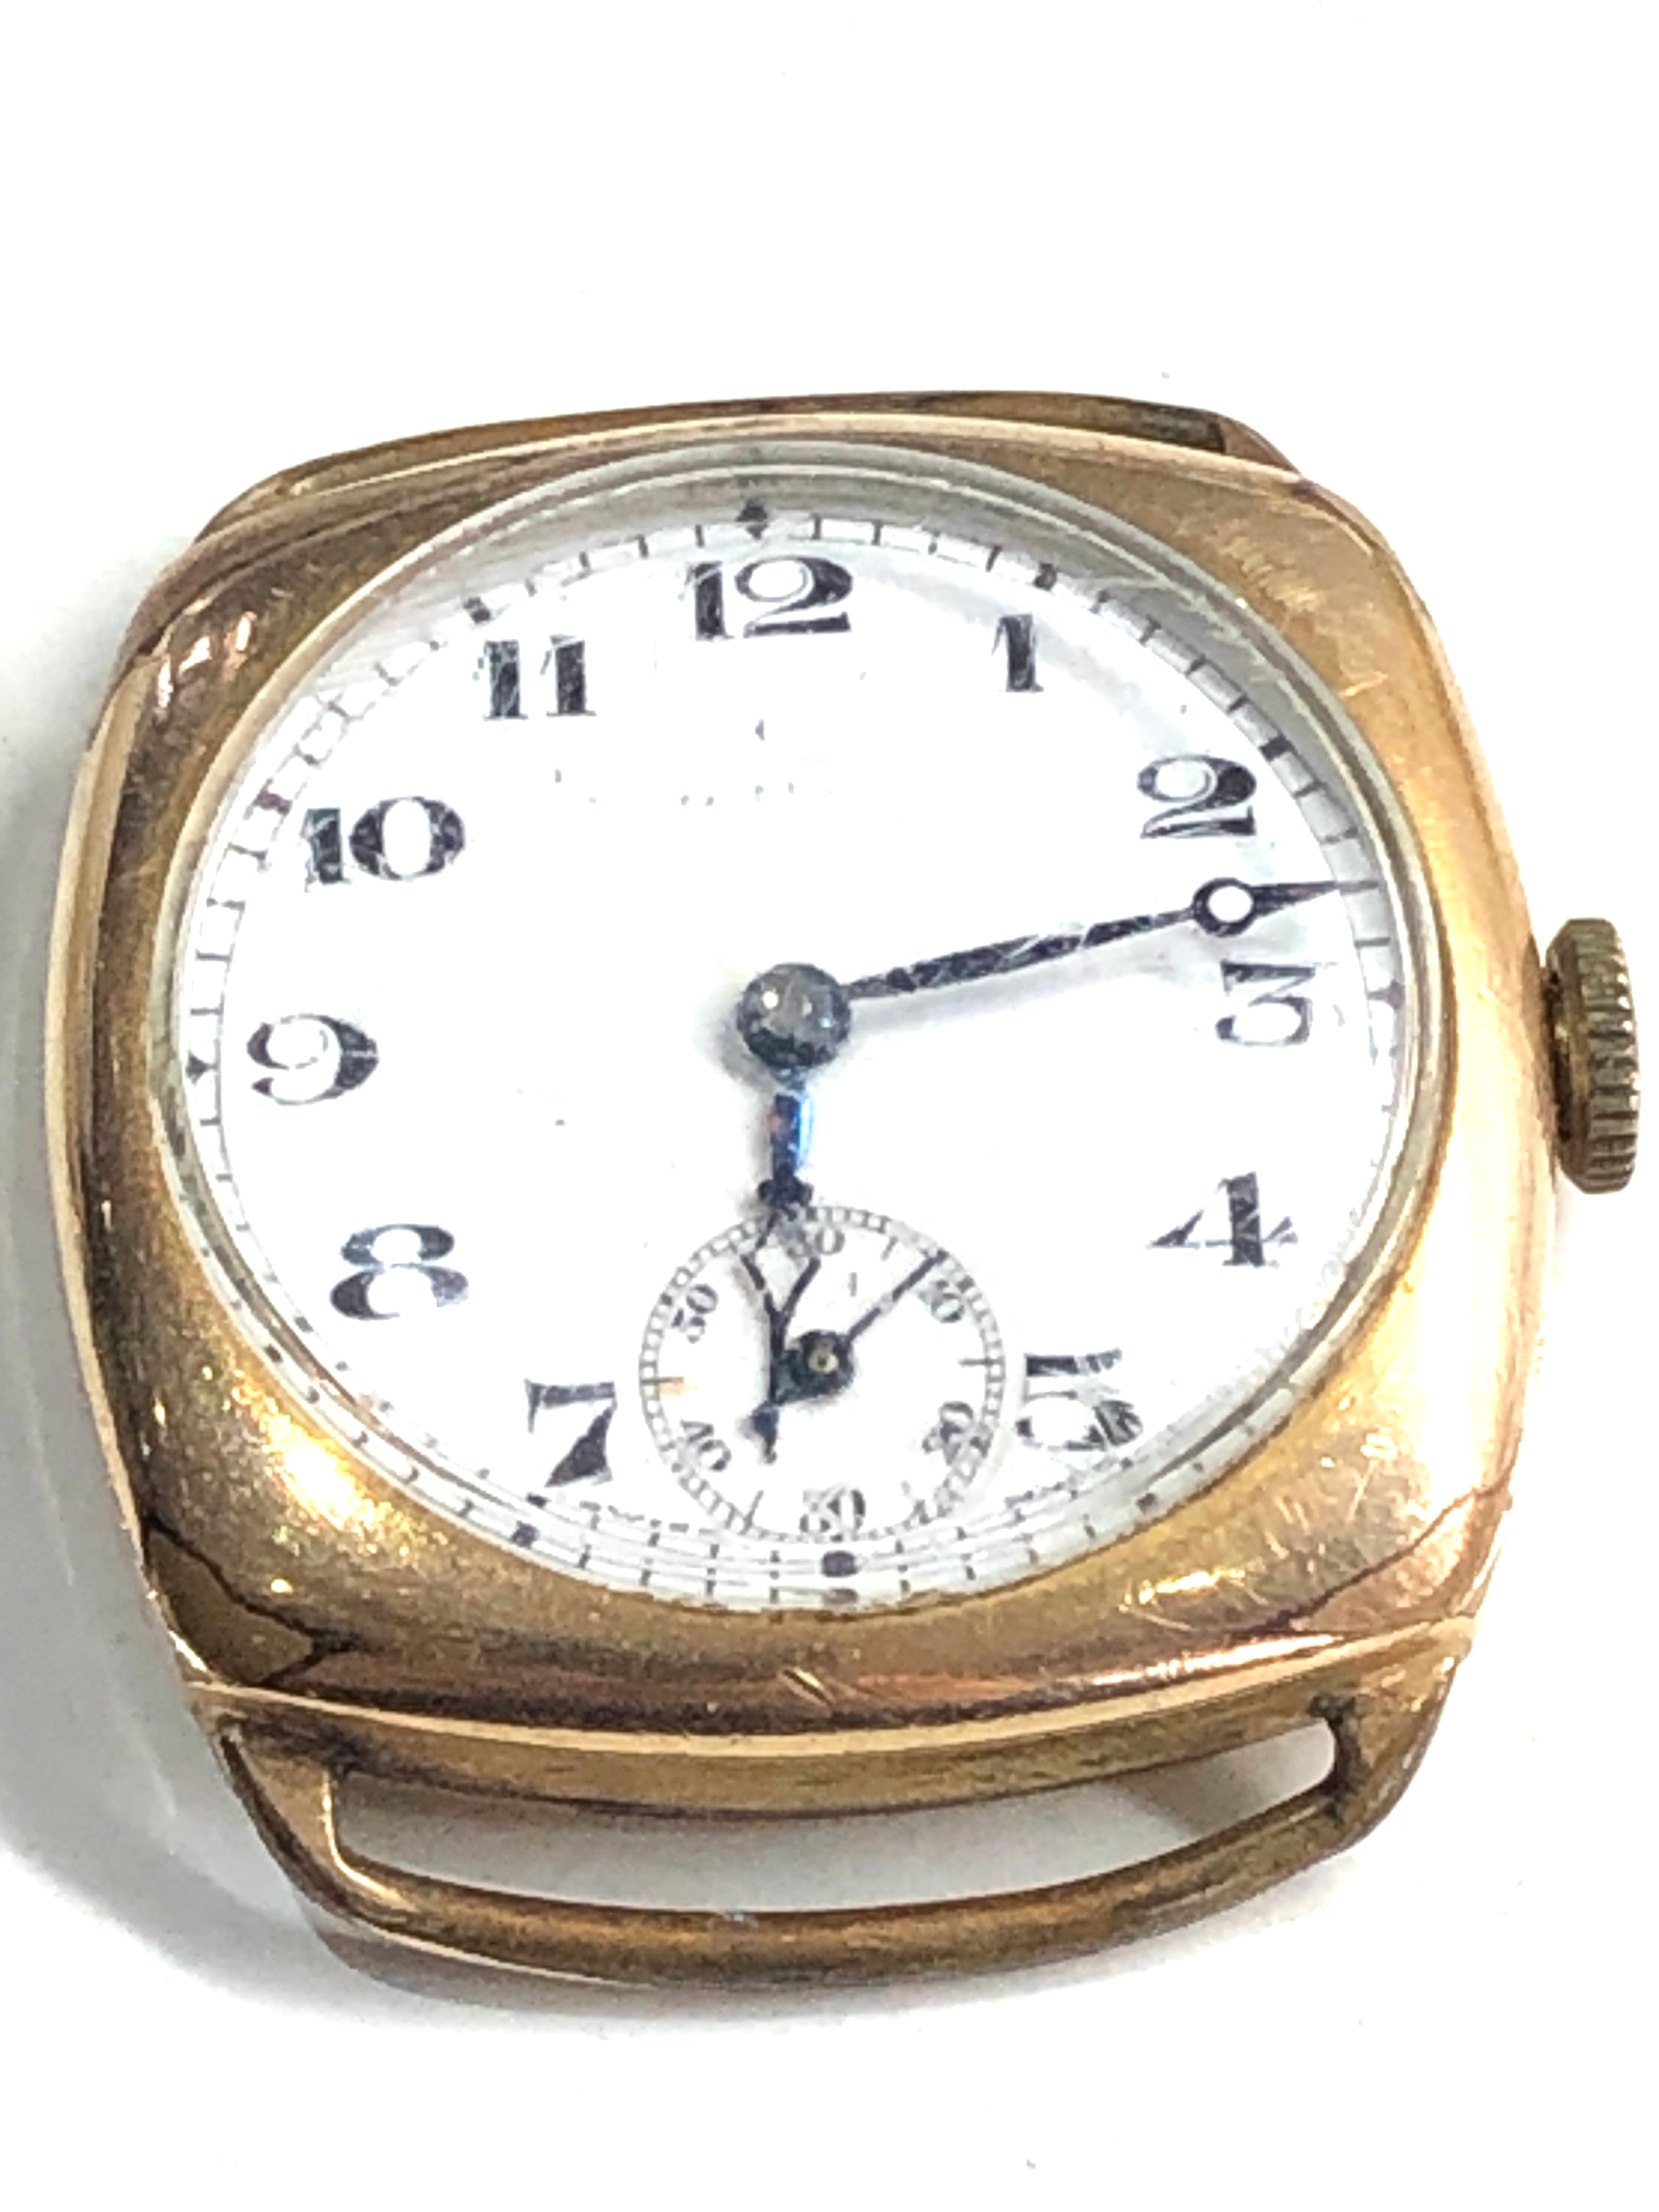 1930s Omega gold plated gents wristwatch the watch is ticking but no warranty given engraved on back